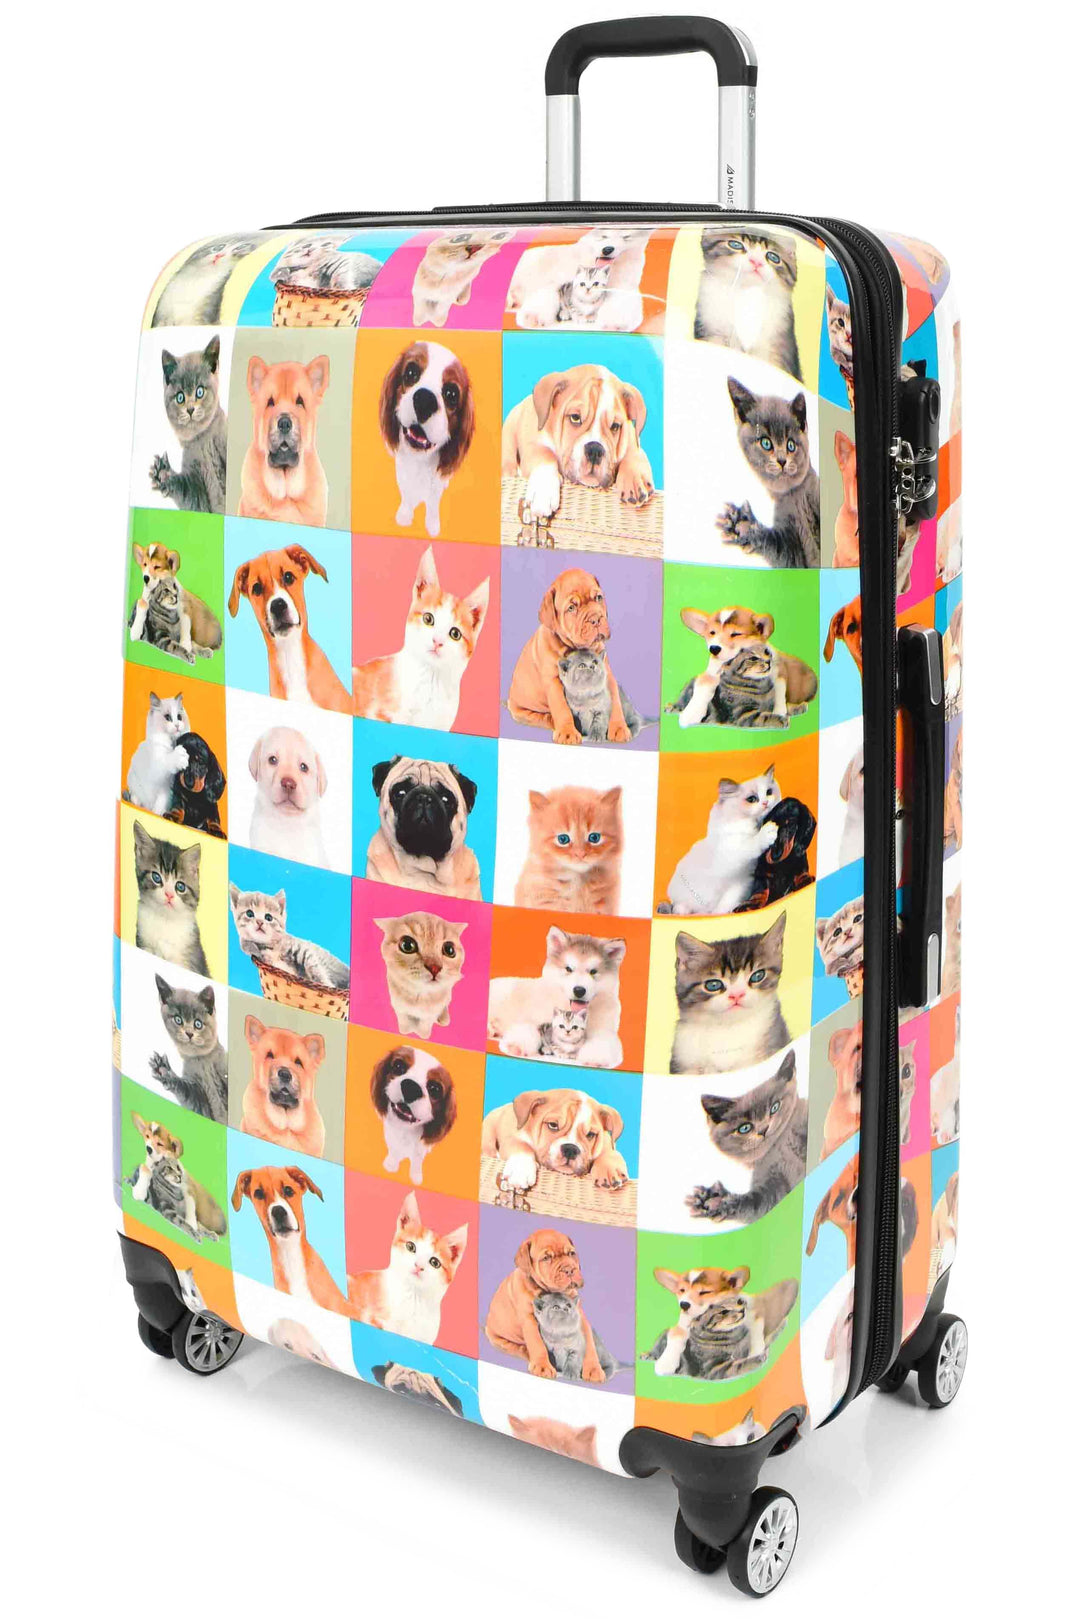 Cats and Dogs Hard Shell Suitcase 1